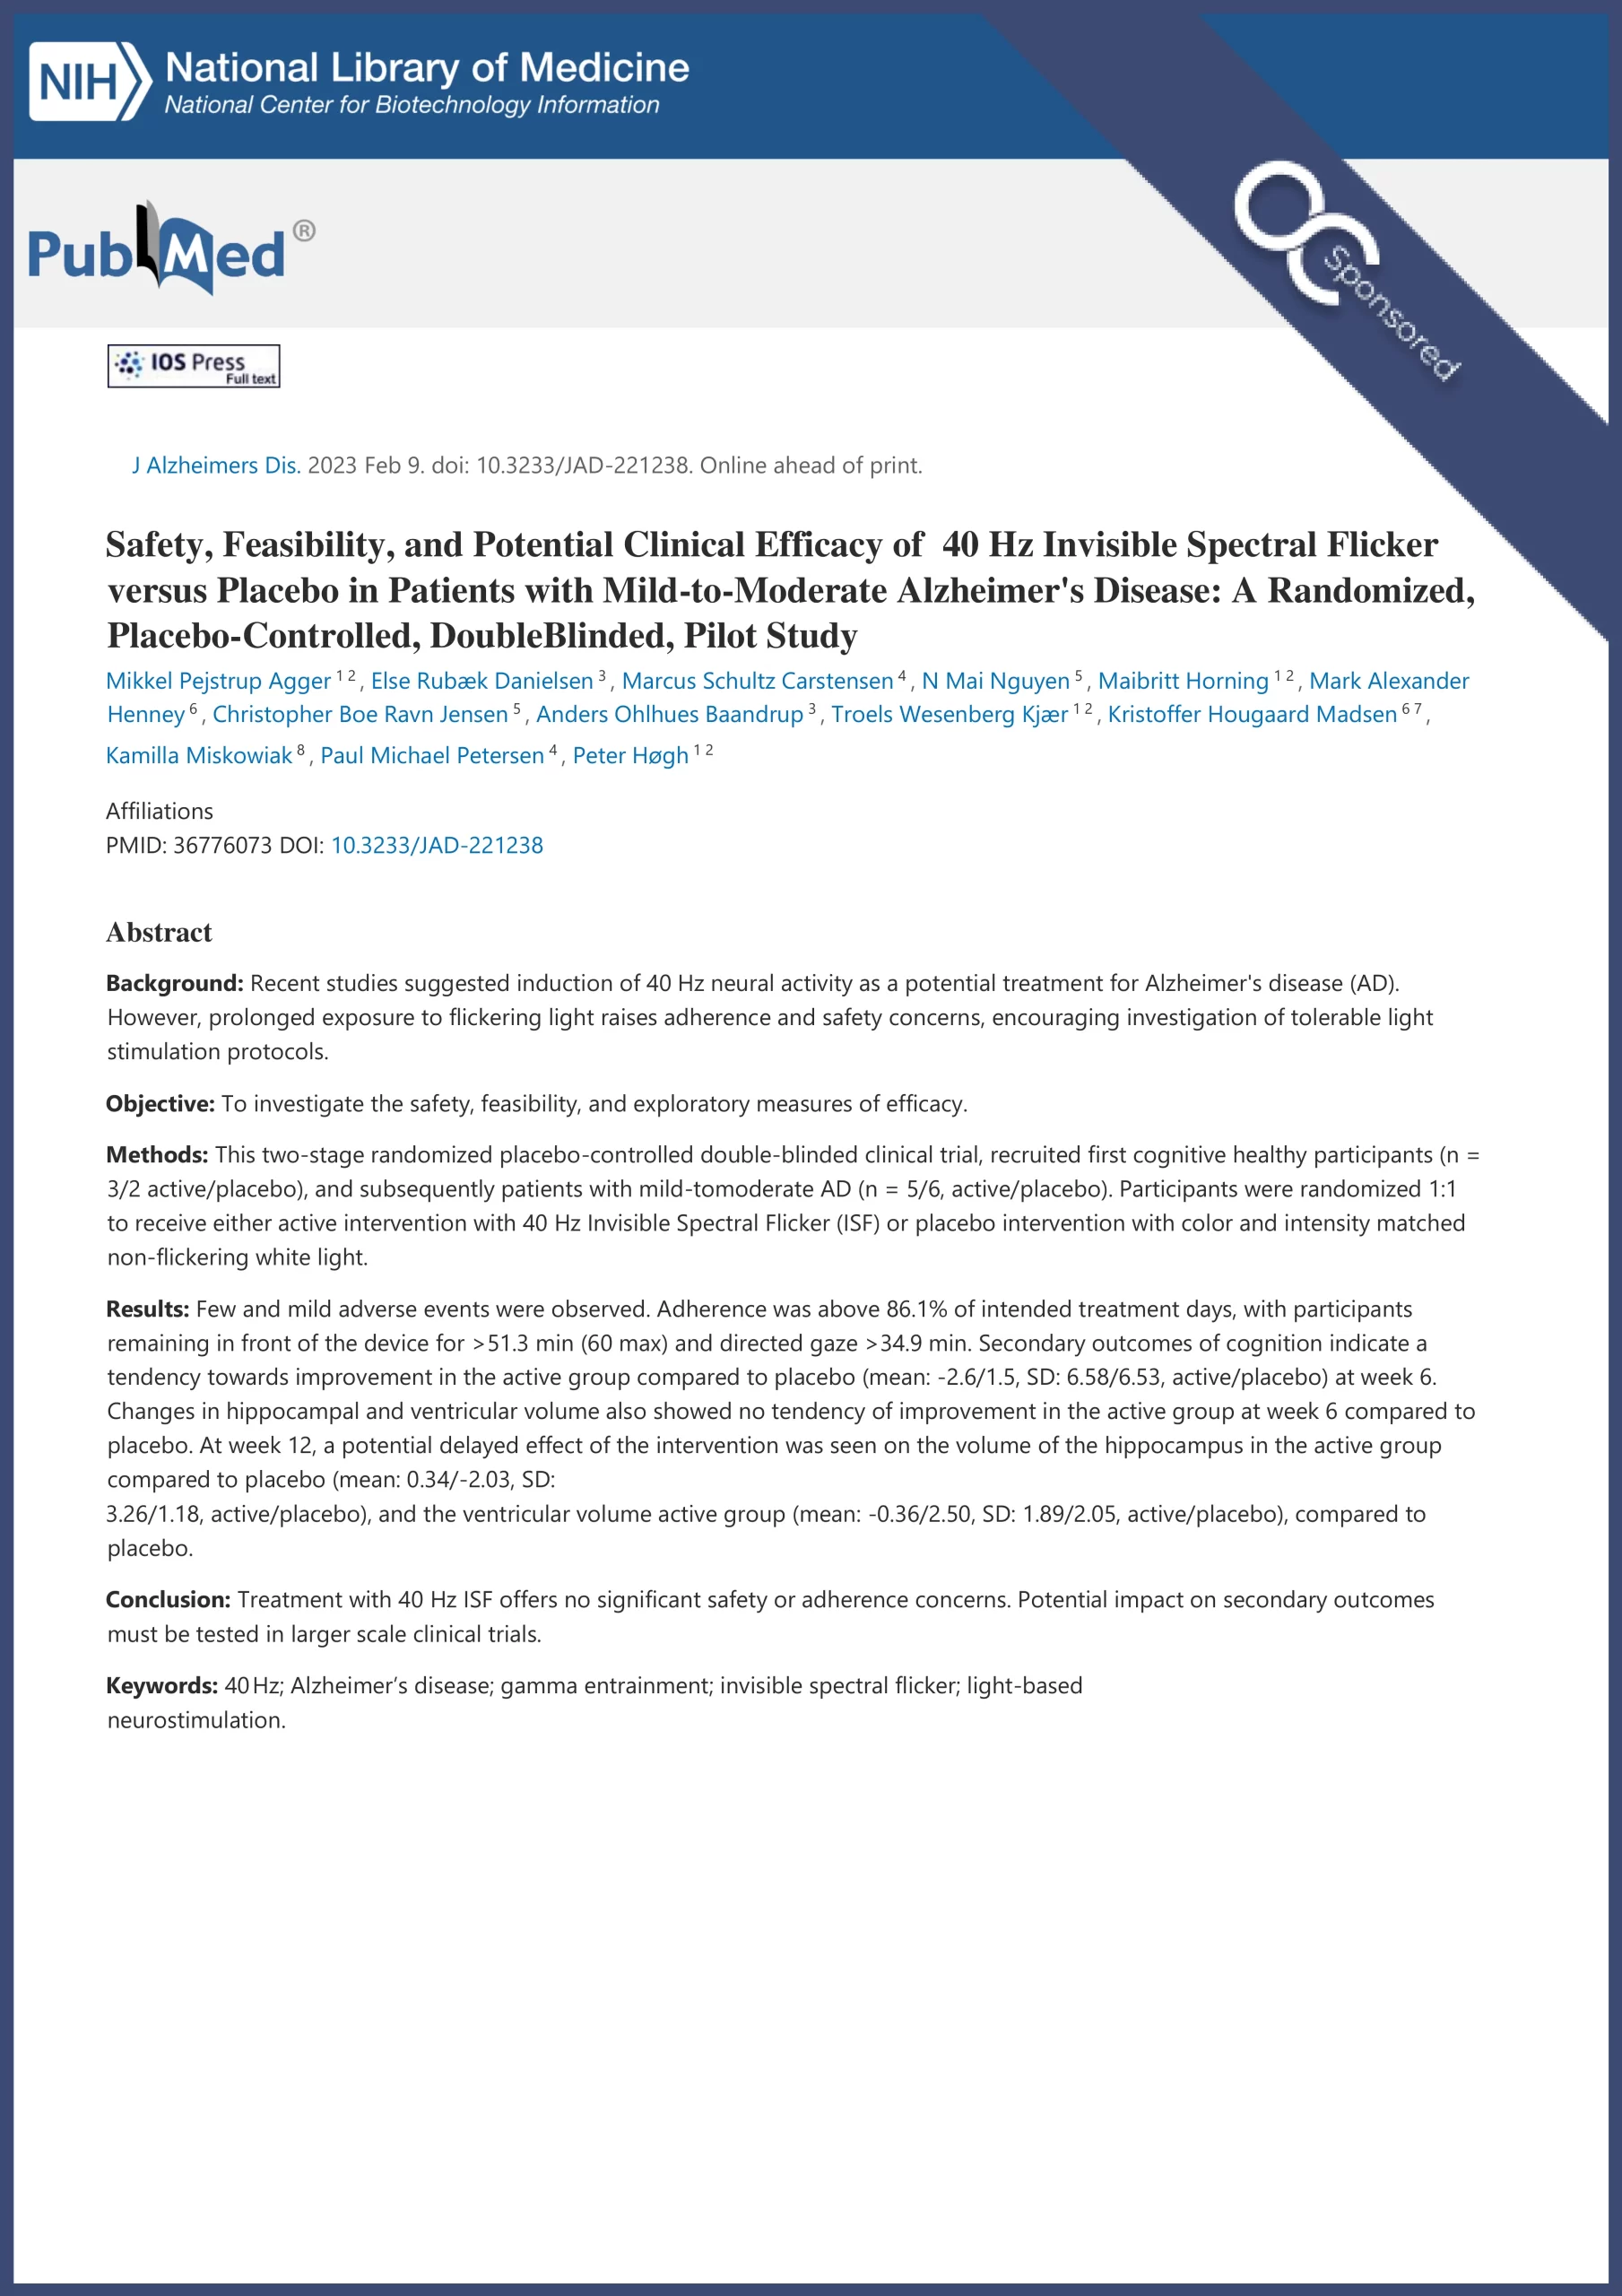 Safety, Feasibility, and Potential Clinical Efficacy of 40 Hz Invisible Spectral Flicker versus Placebo in Patients with Mild-to-Moderate Alzheimer's Disease: A Randomized, Placebo-Controlled, DoubleBlinded, Pilot Study publication by Agger 2023 sponsored by Optoceutics